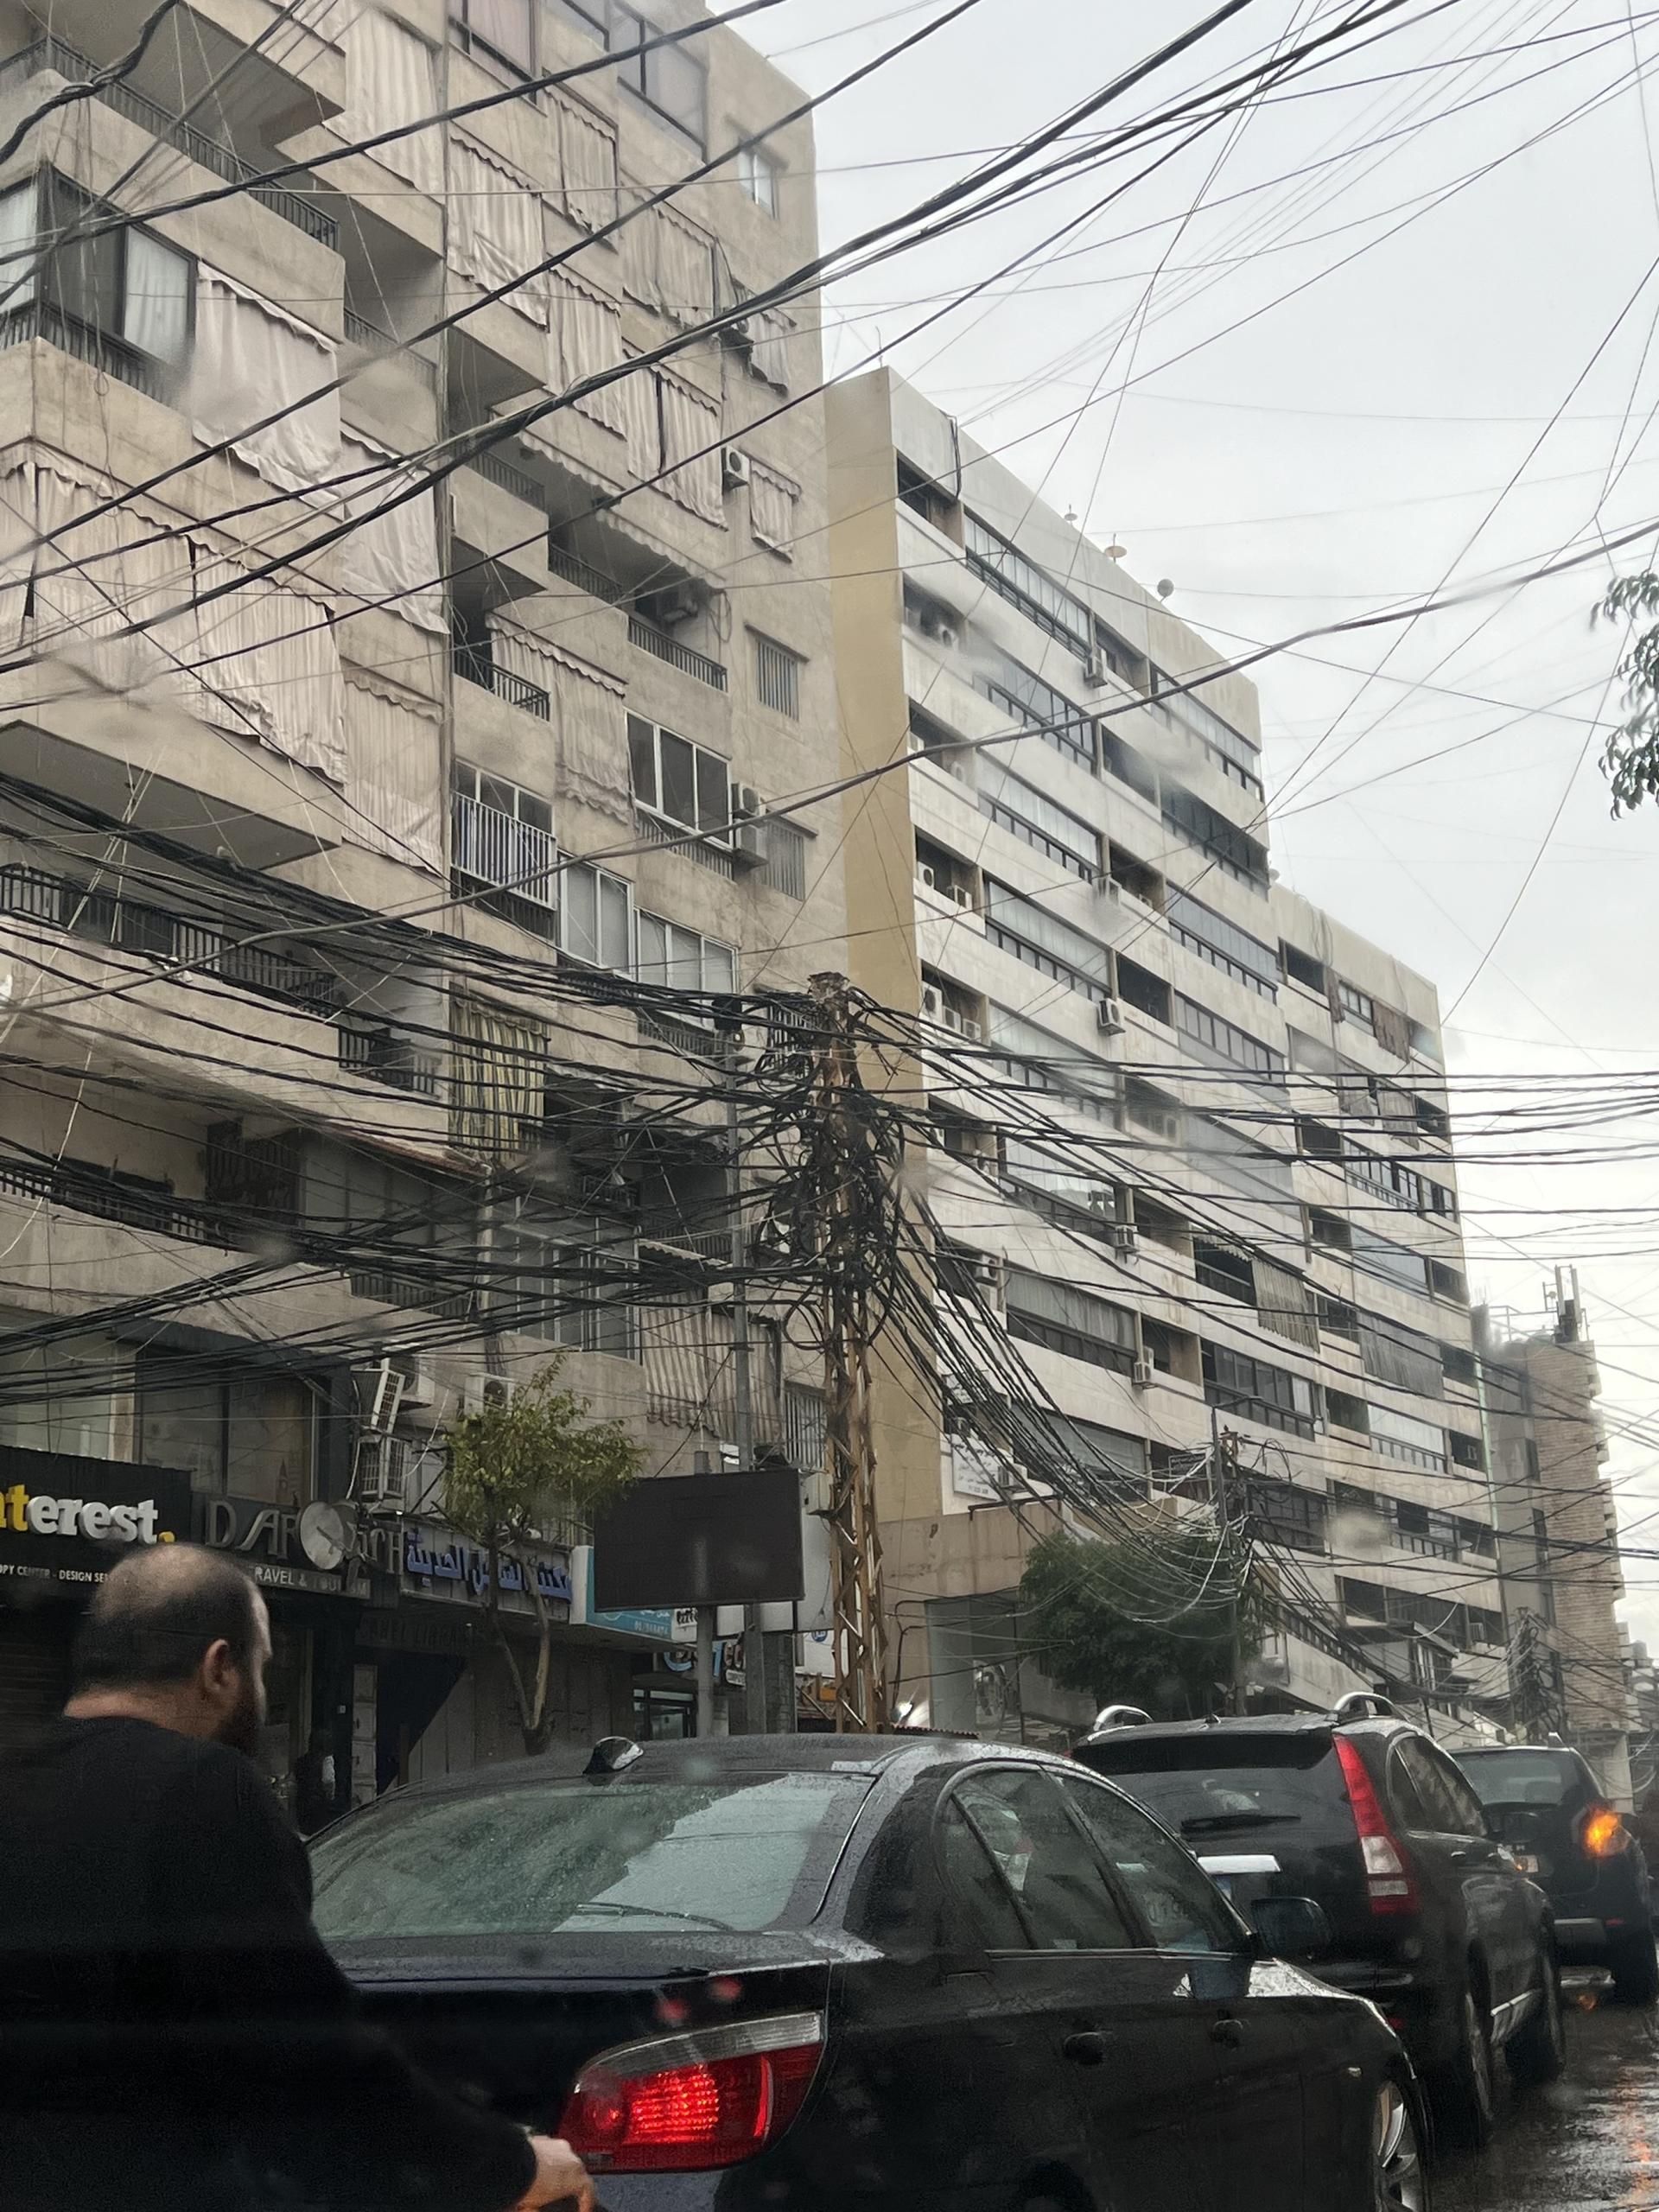 A web of electric cables runs through a neighborhood in Beirut. Government-provider electricity is only available for only a few hours a day.